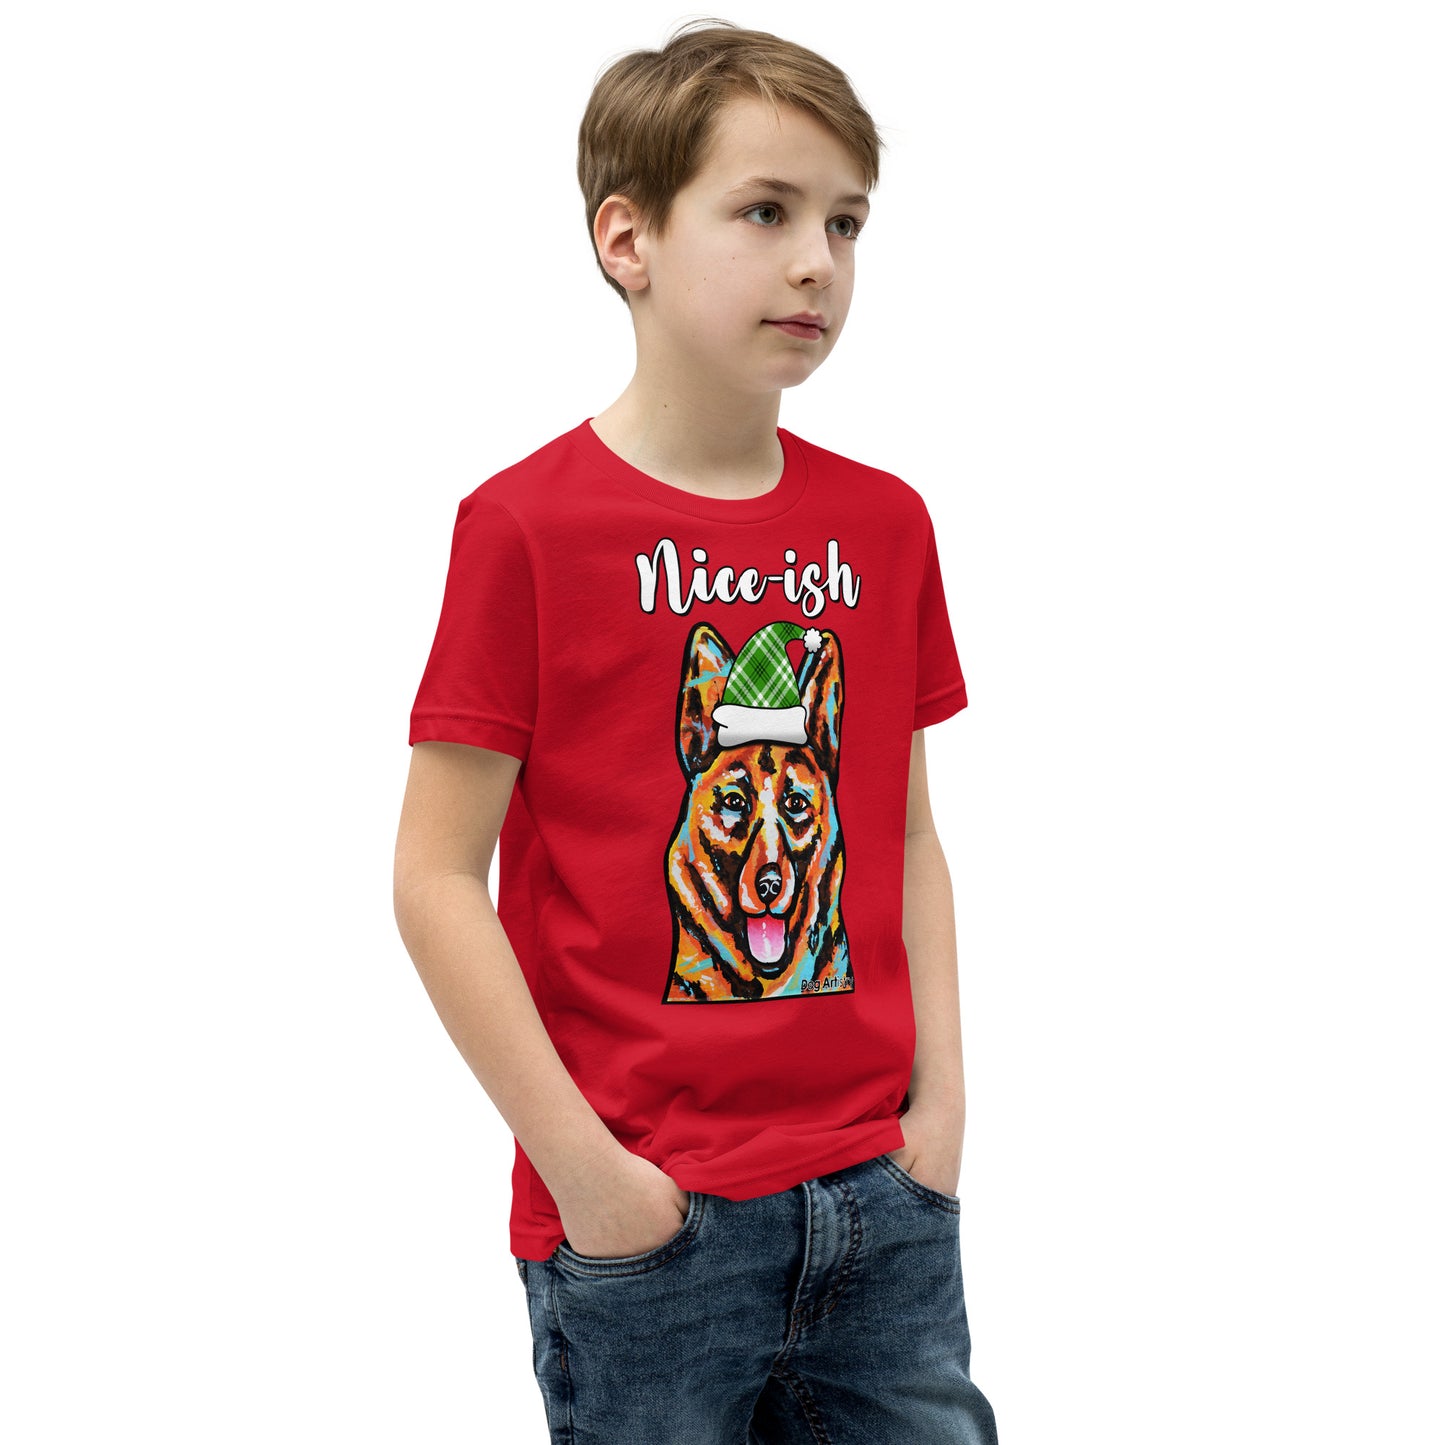 Nice-Ish German Shepherd Holiday youth t-shirt red by Dog Artistry.